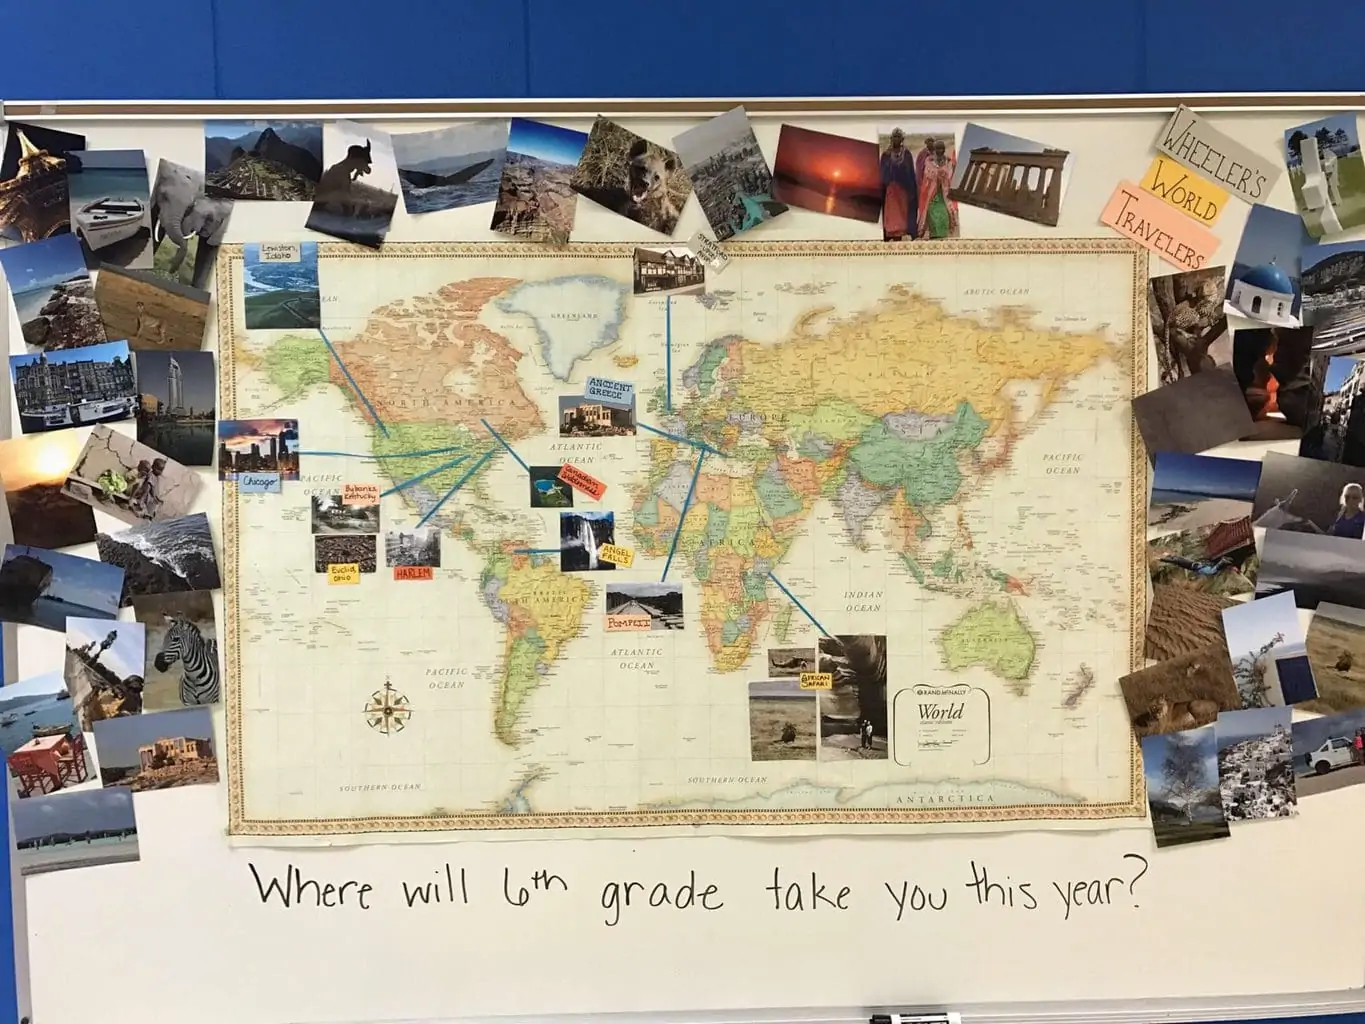 My travel pictures and classroom map for sixth grade Language Arts